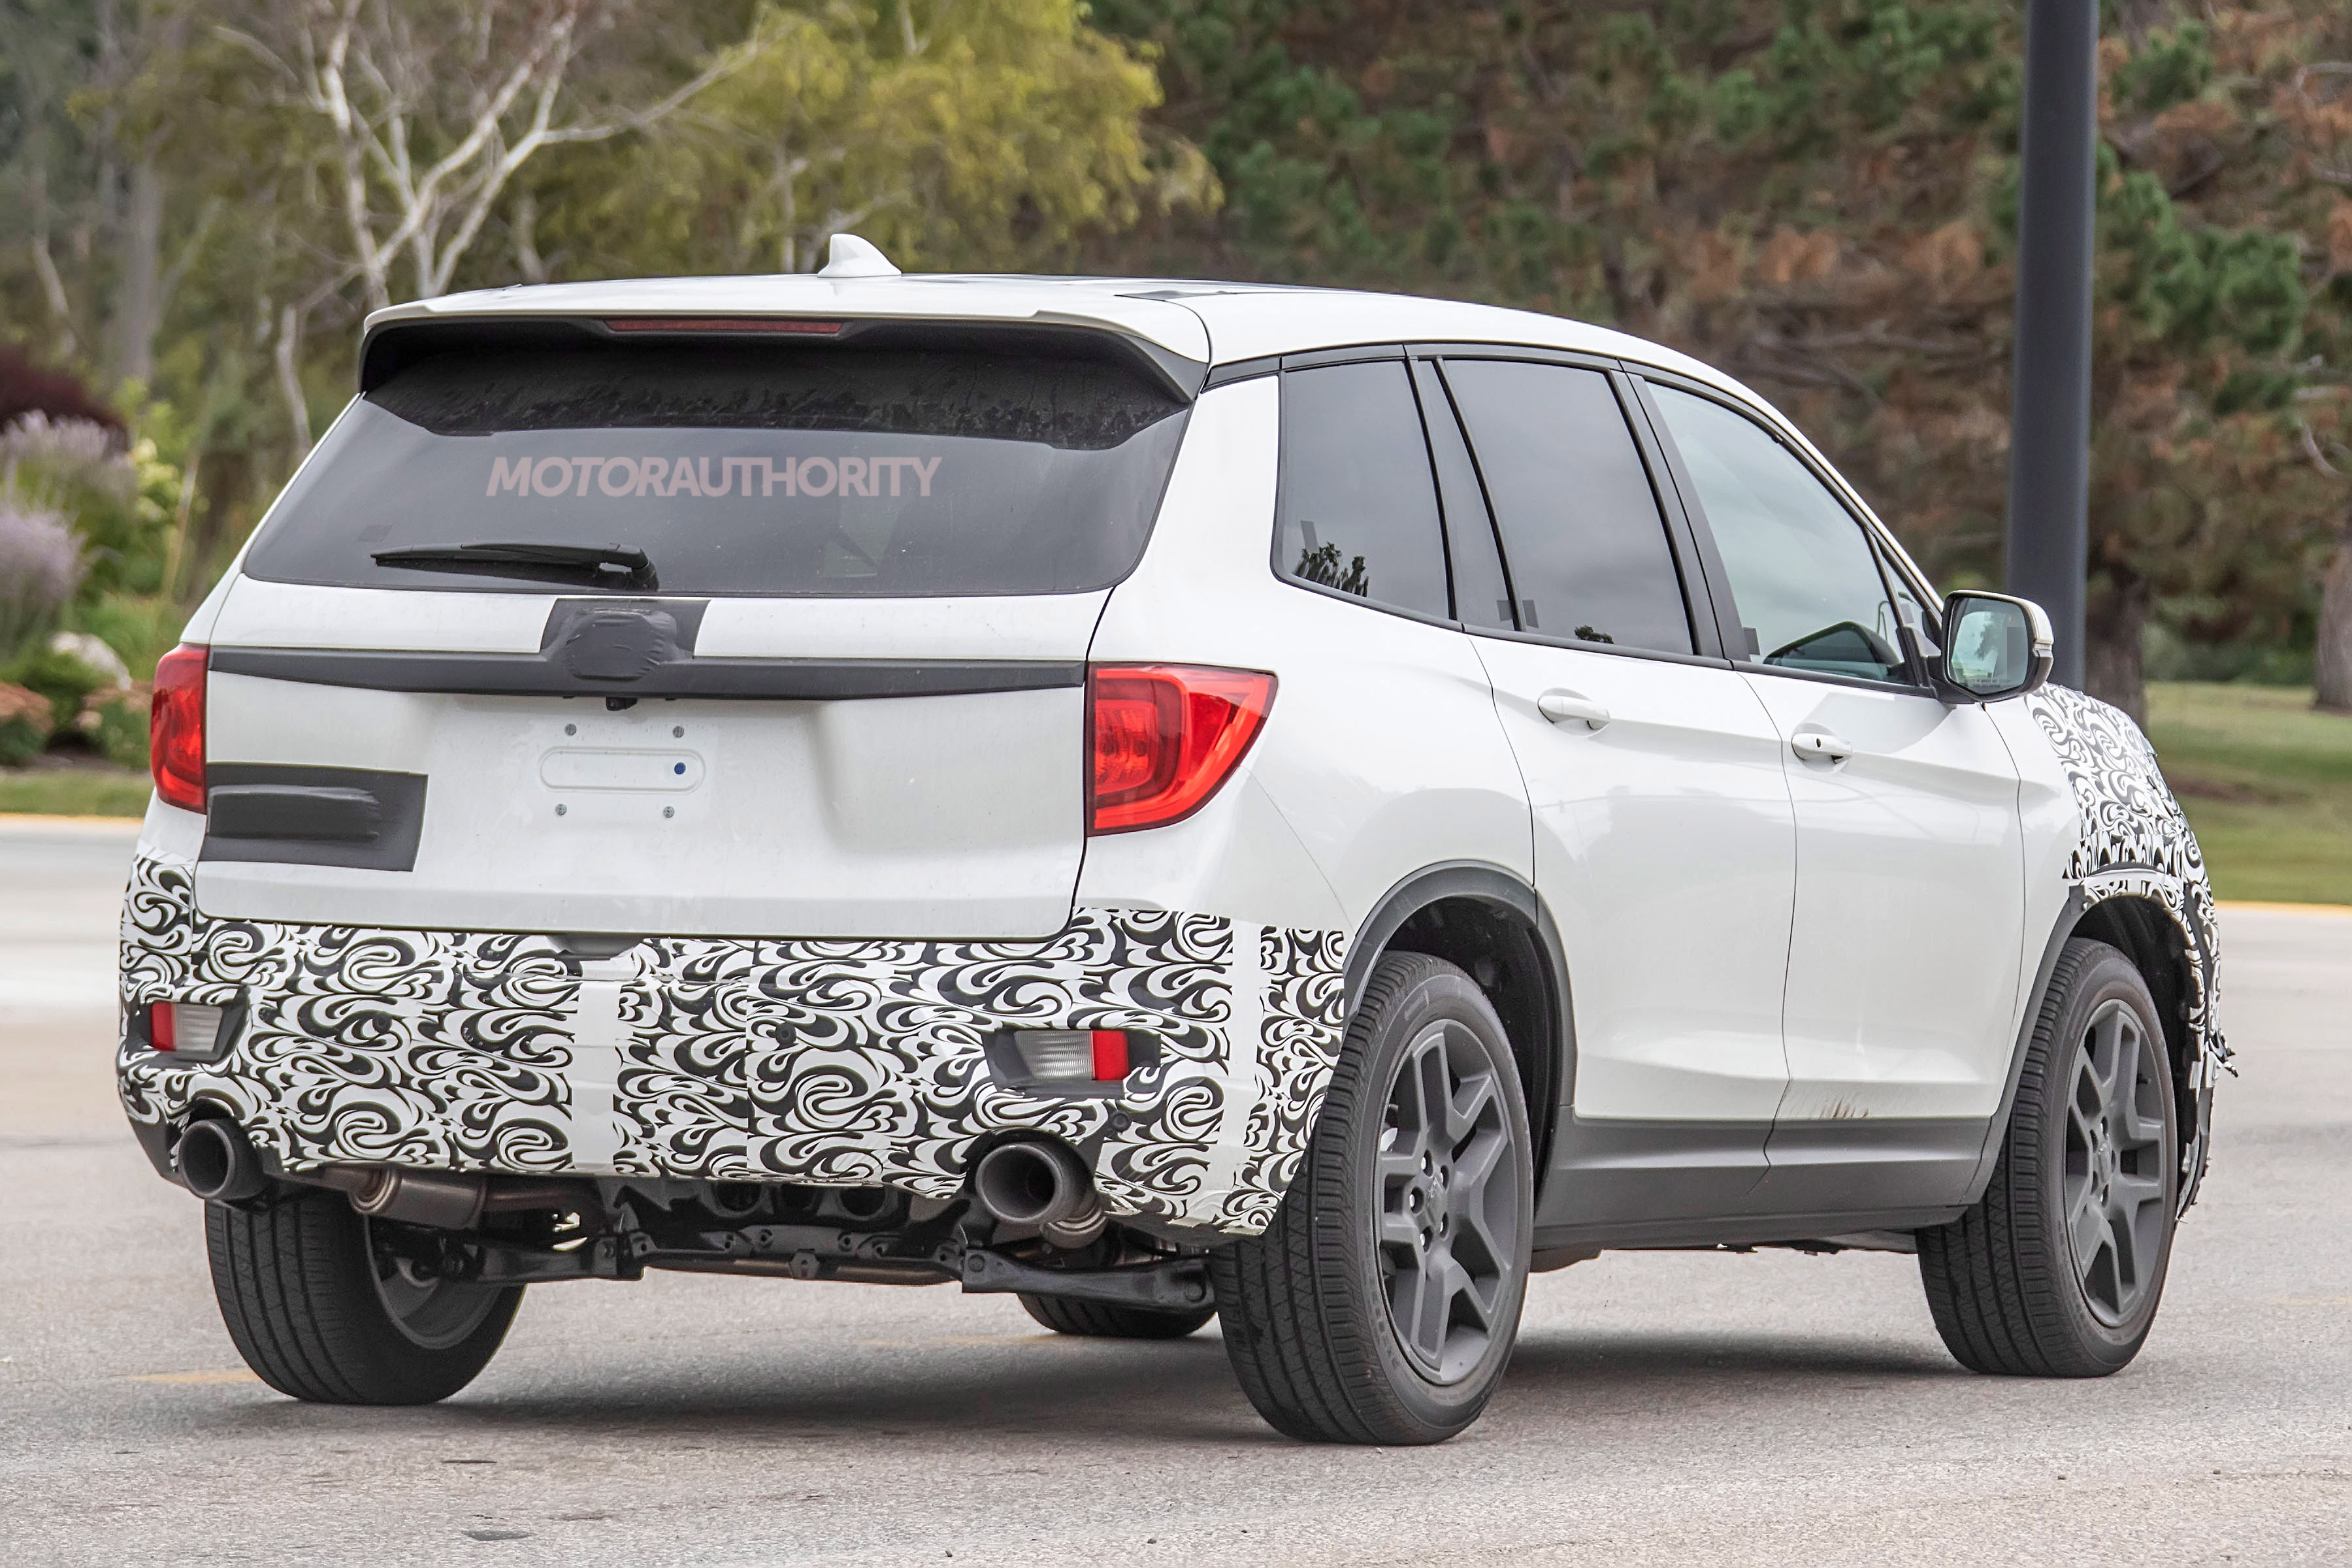 2022 Honda Passport spy shots Family crossover wants to be rugged looking